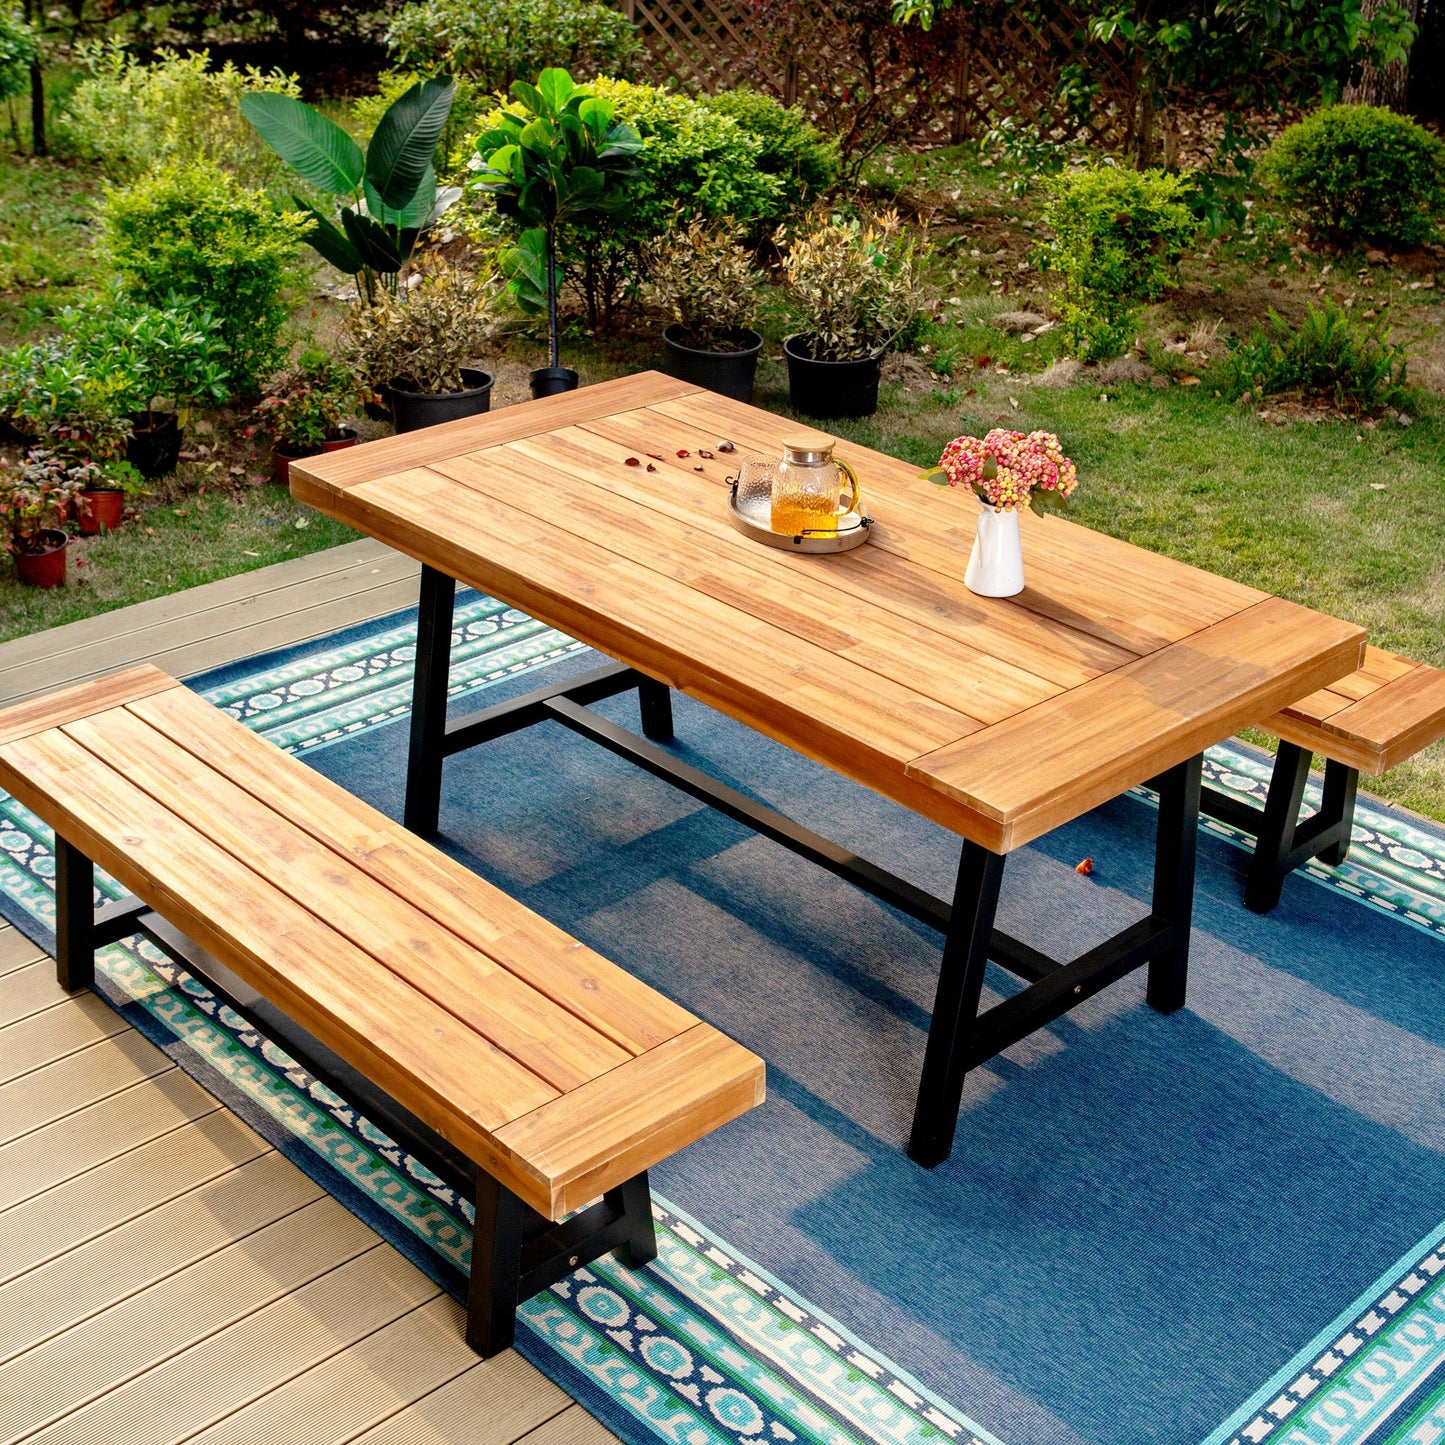 Sophia & William 3 Pieces Outdoor Patio Dining Set Acacia Wood Table Bench with 1 Wooden Dining Table and 2 Benches